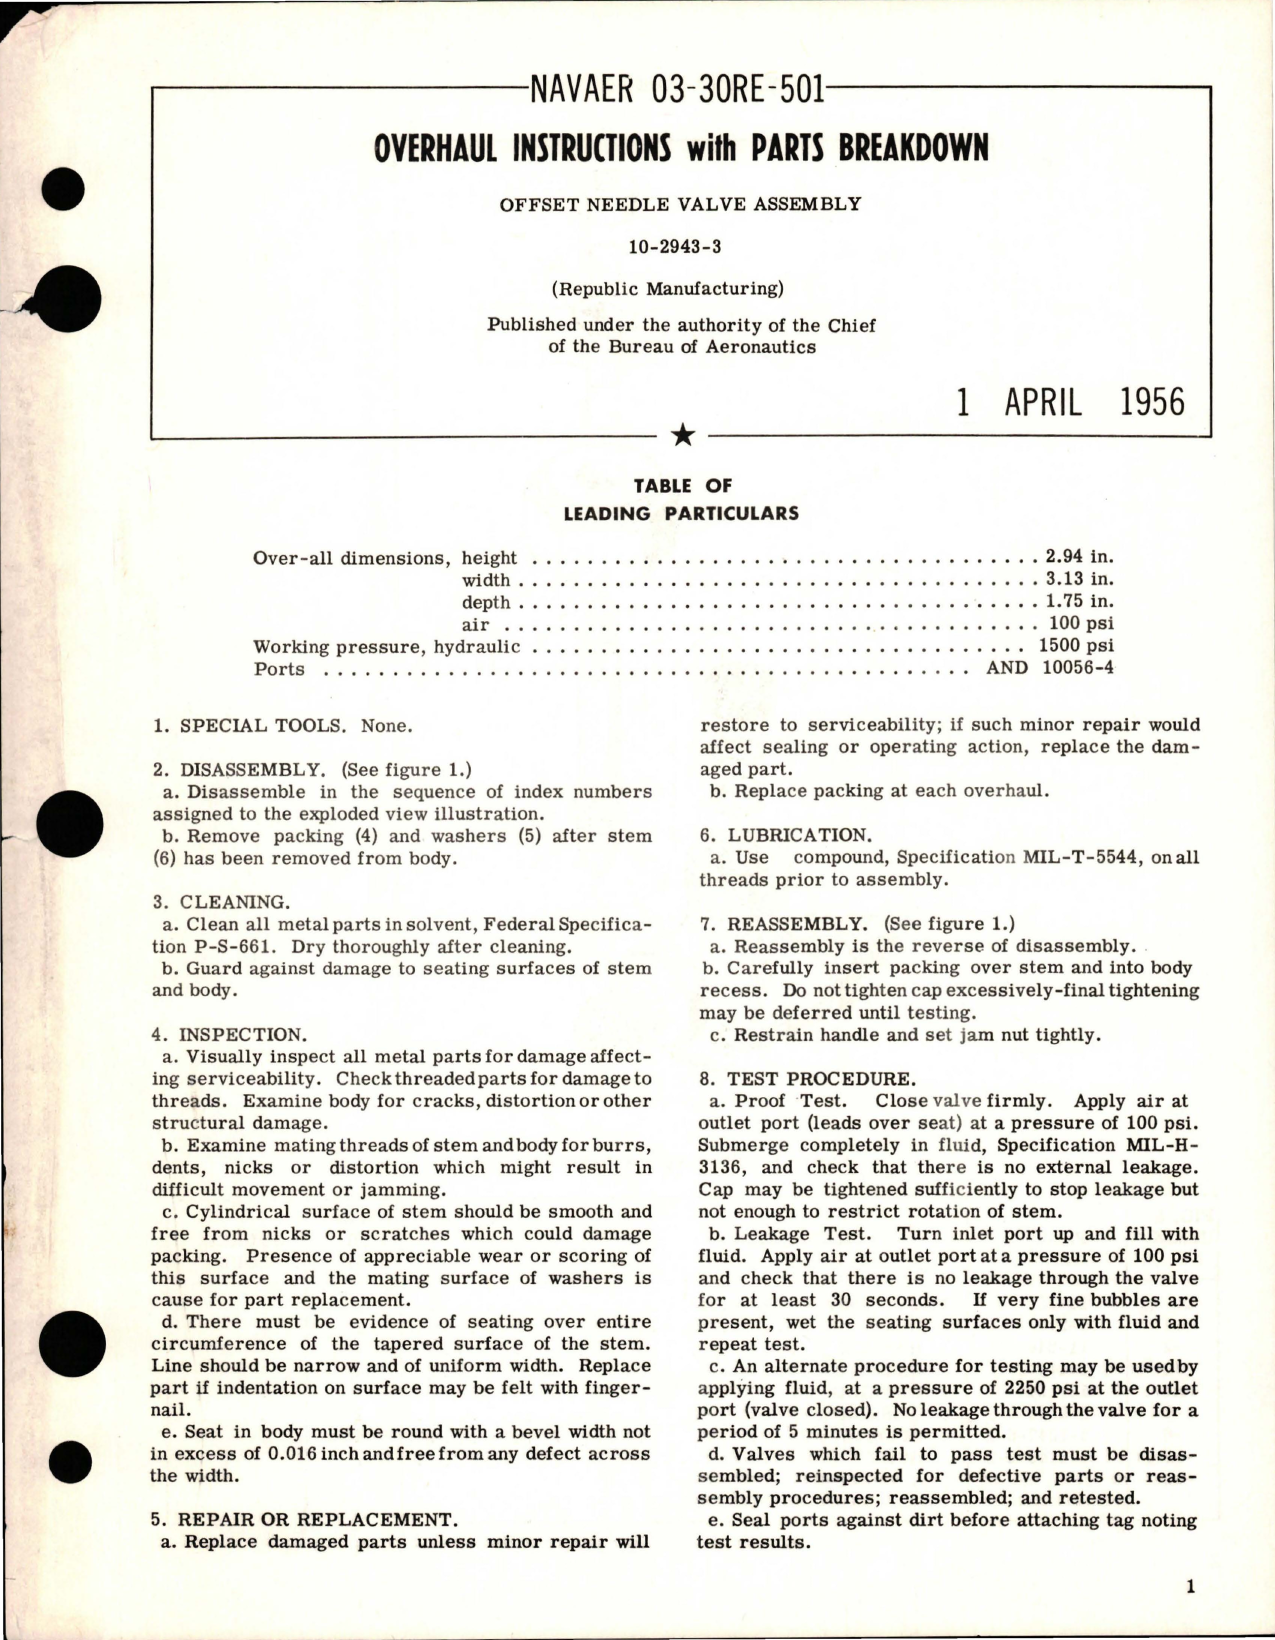 Sample page 1 from AirCorps Library document: Overhaul Instructions with Parts Breakdown for Offset Needle Valve Assembly - 10-2943-3